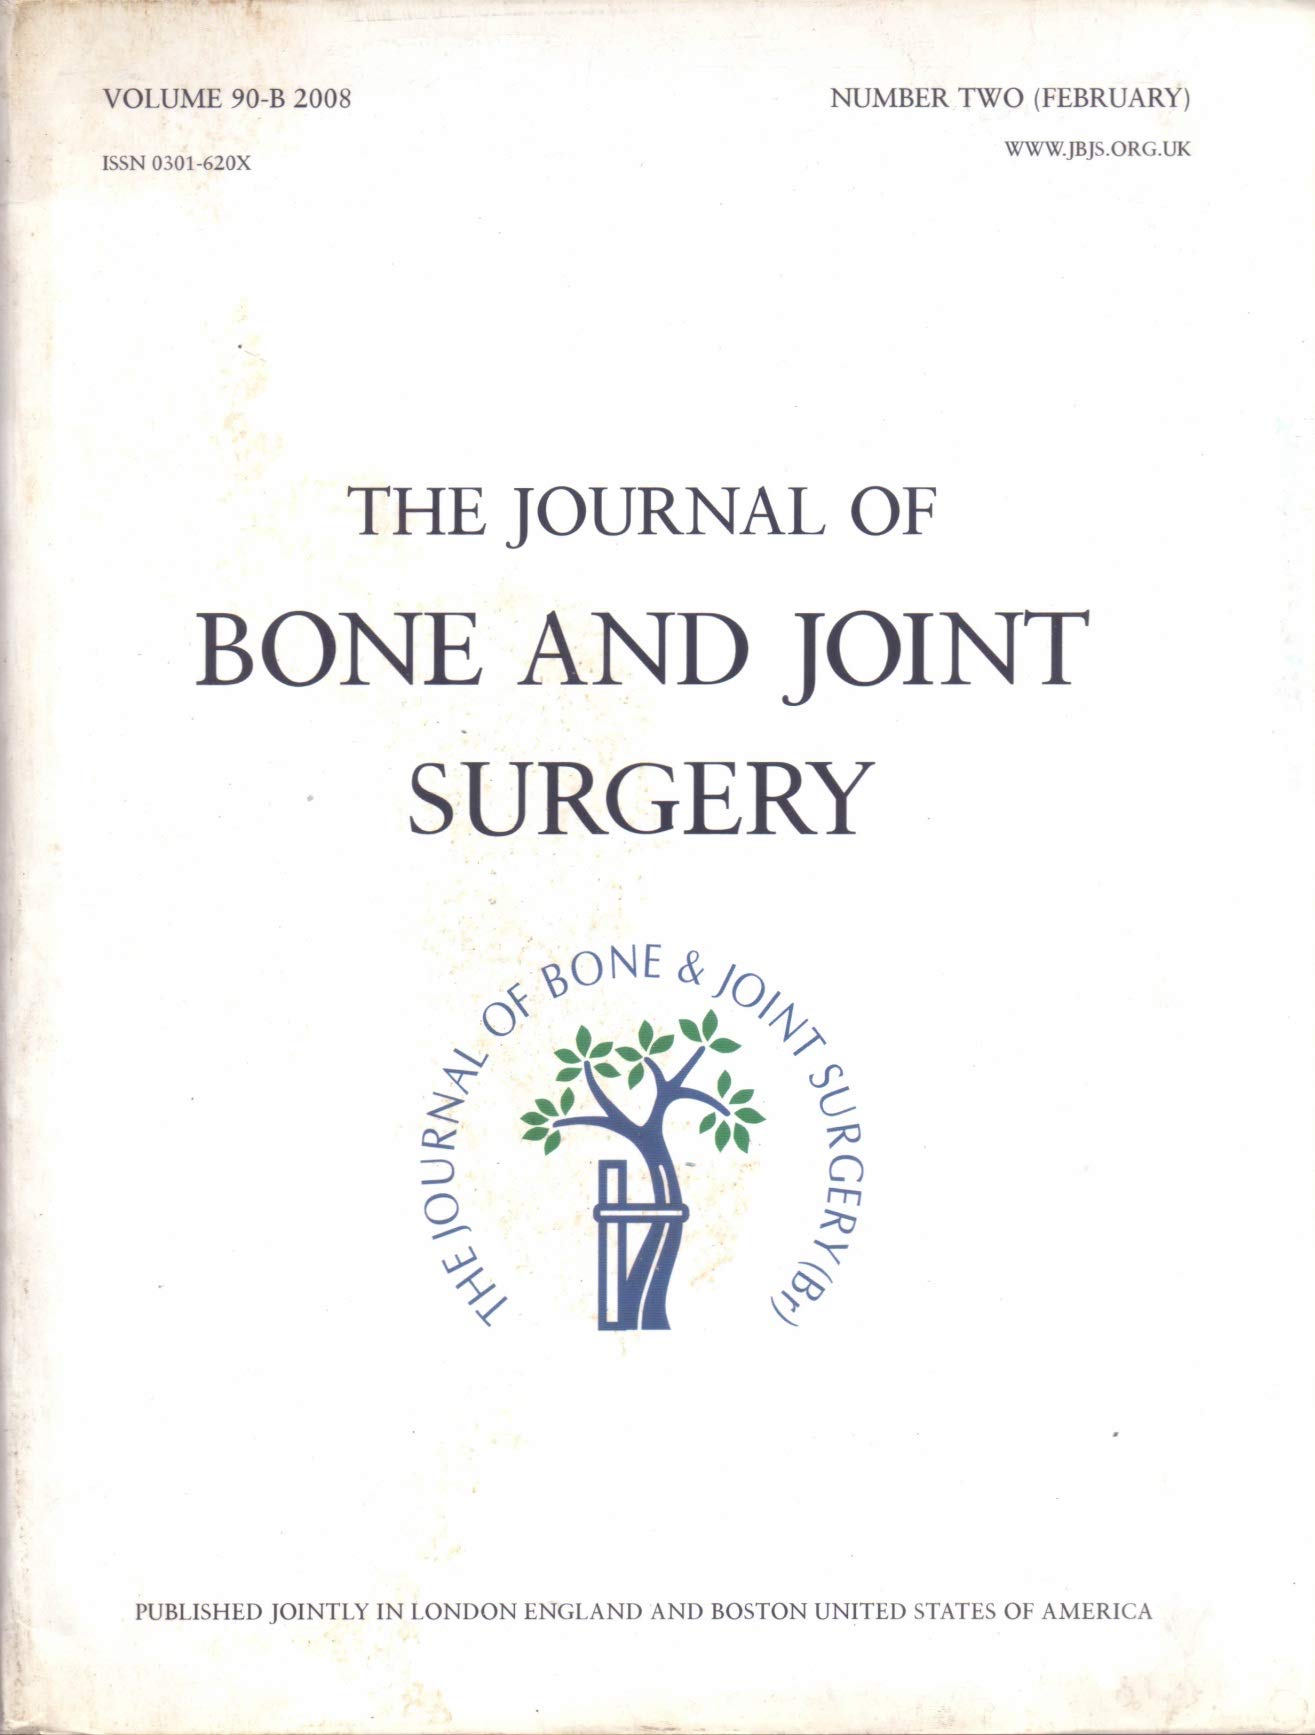 The Journal of Bone and Joint Surgery